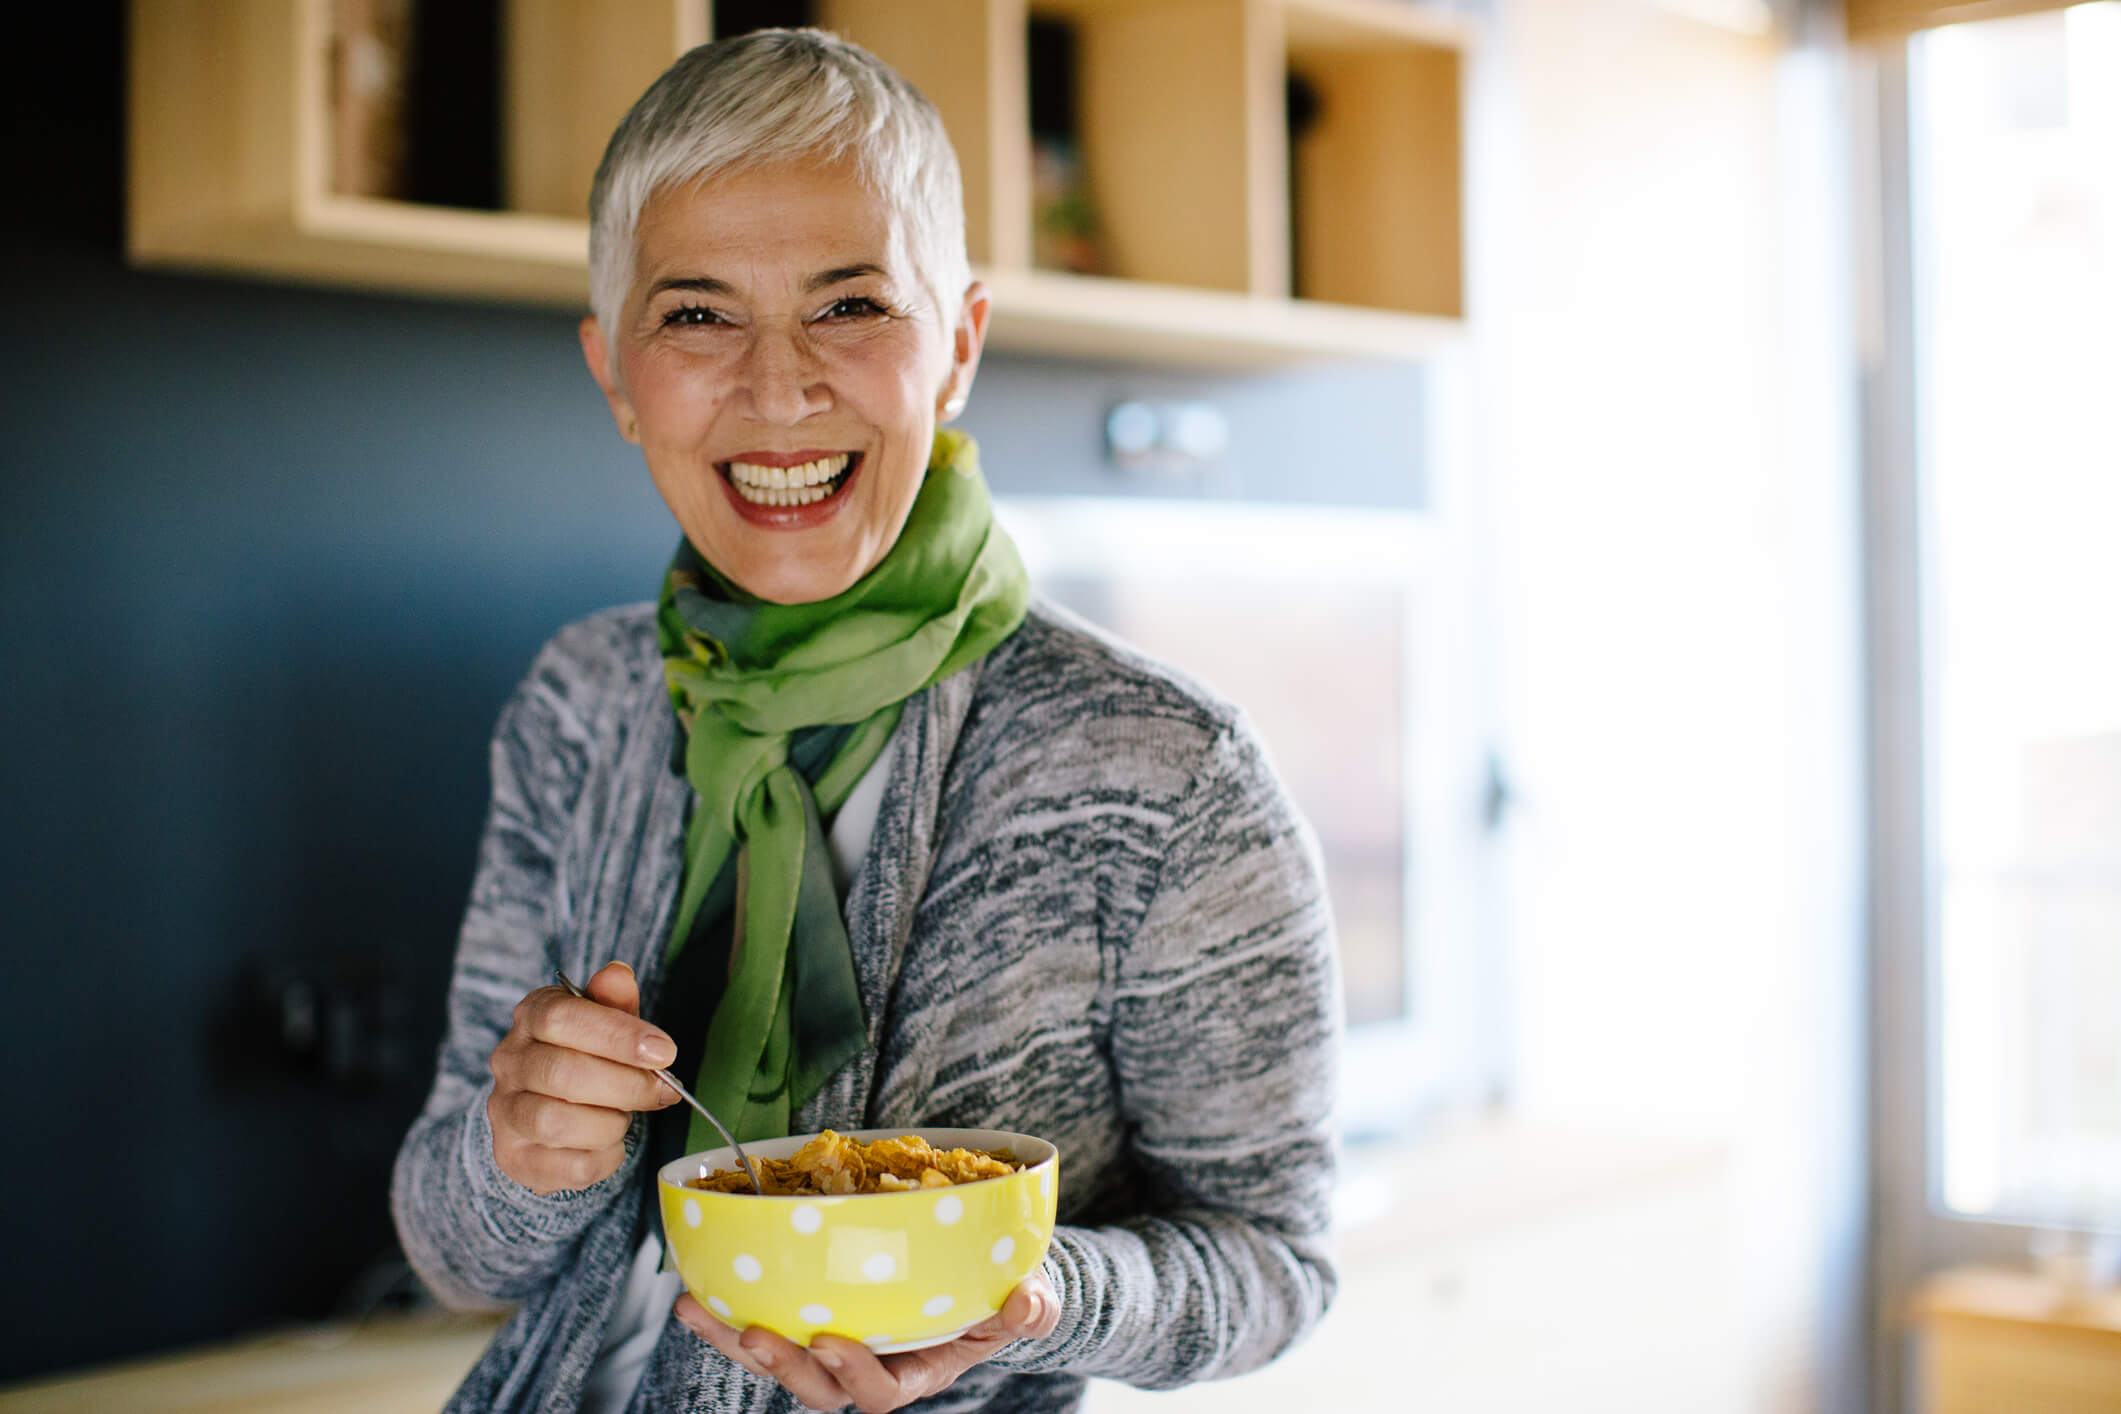 woman with dentures holding a cereal bowl and smiling